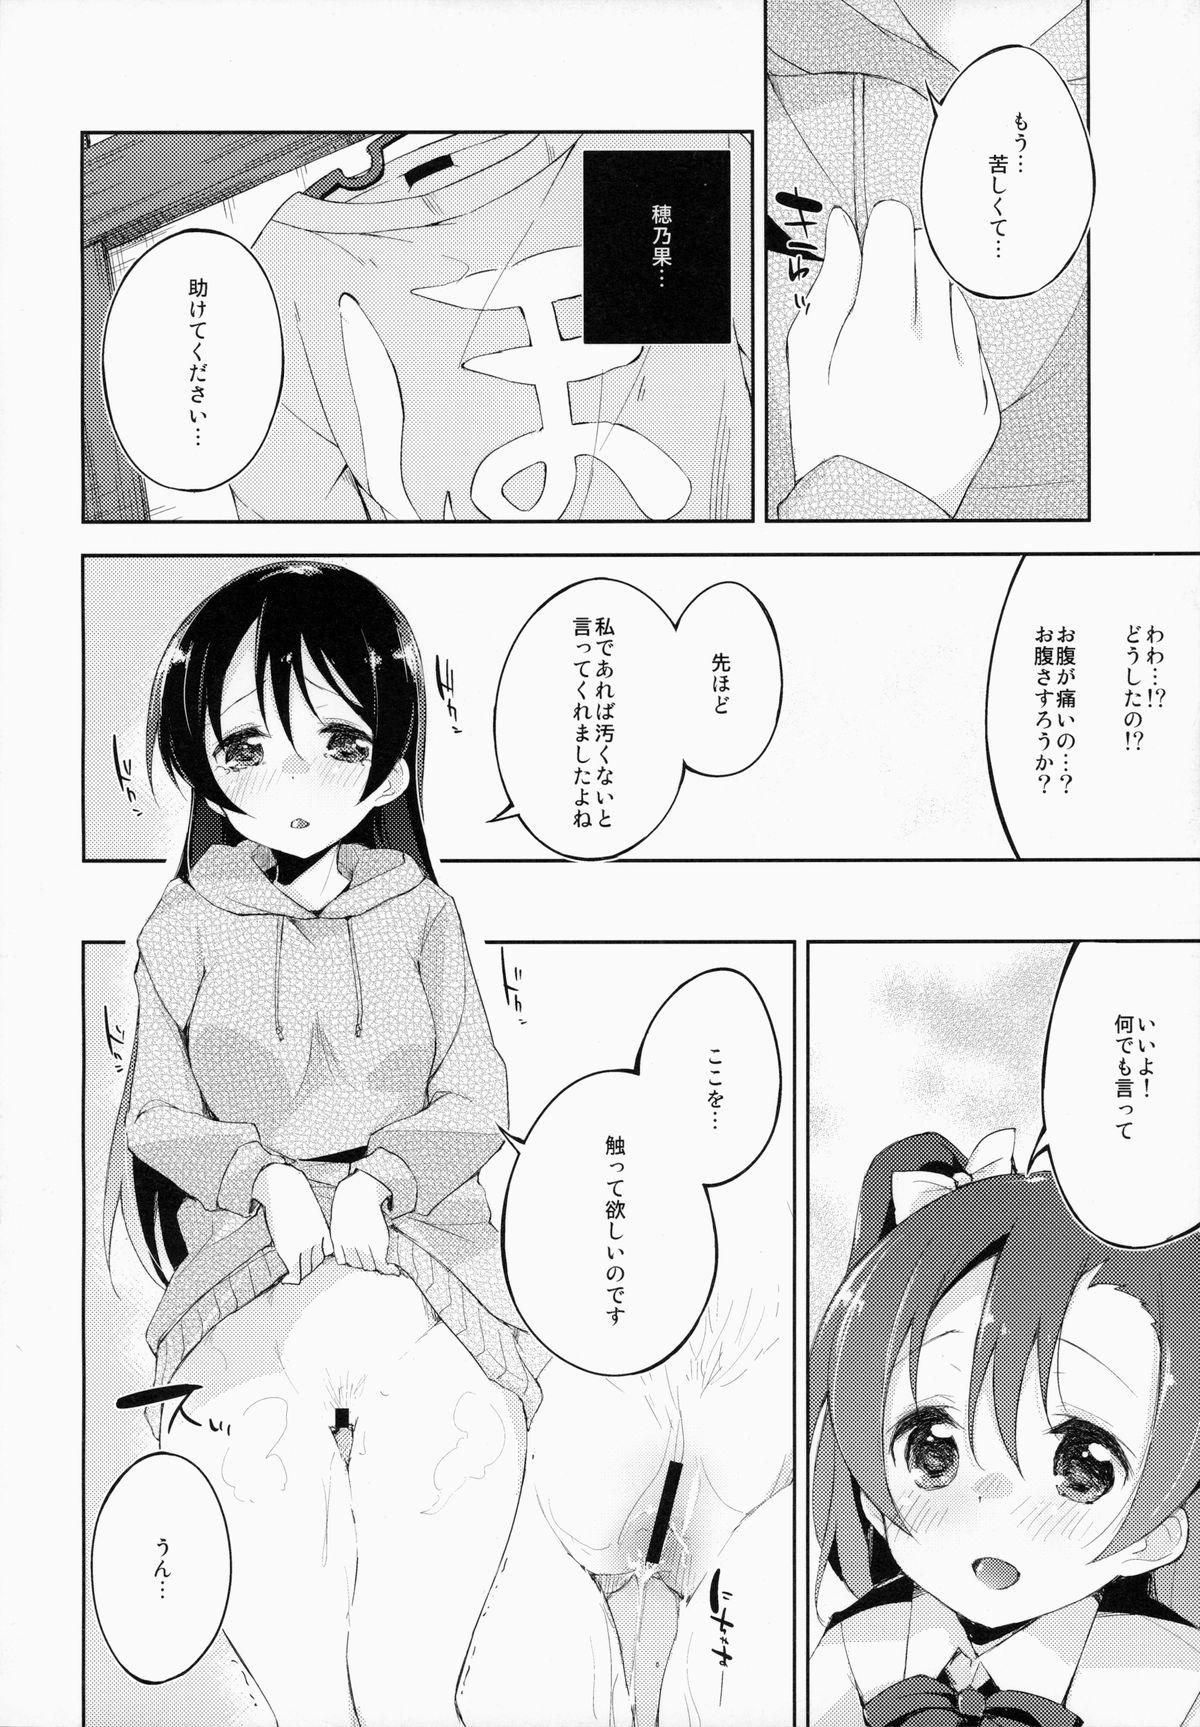 Rimming CHERRY PiCKING DAYS. - Love live Gemidos - Page 11